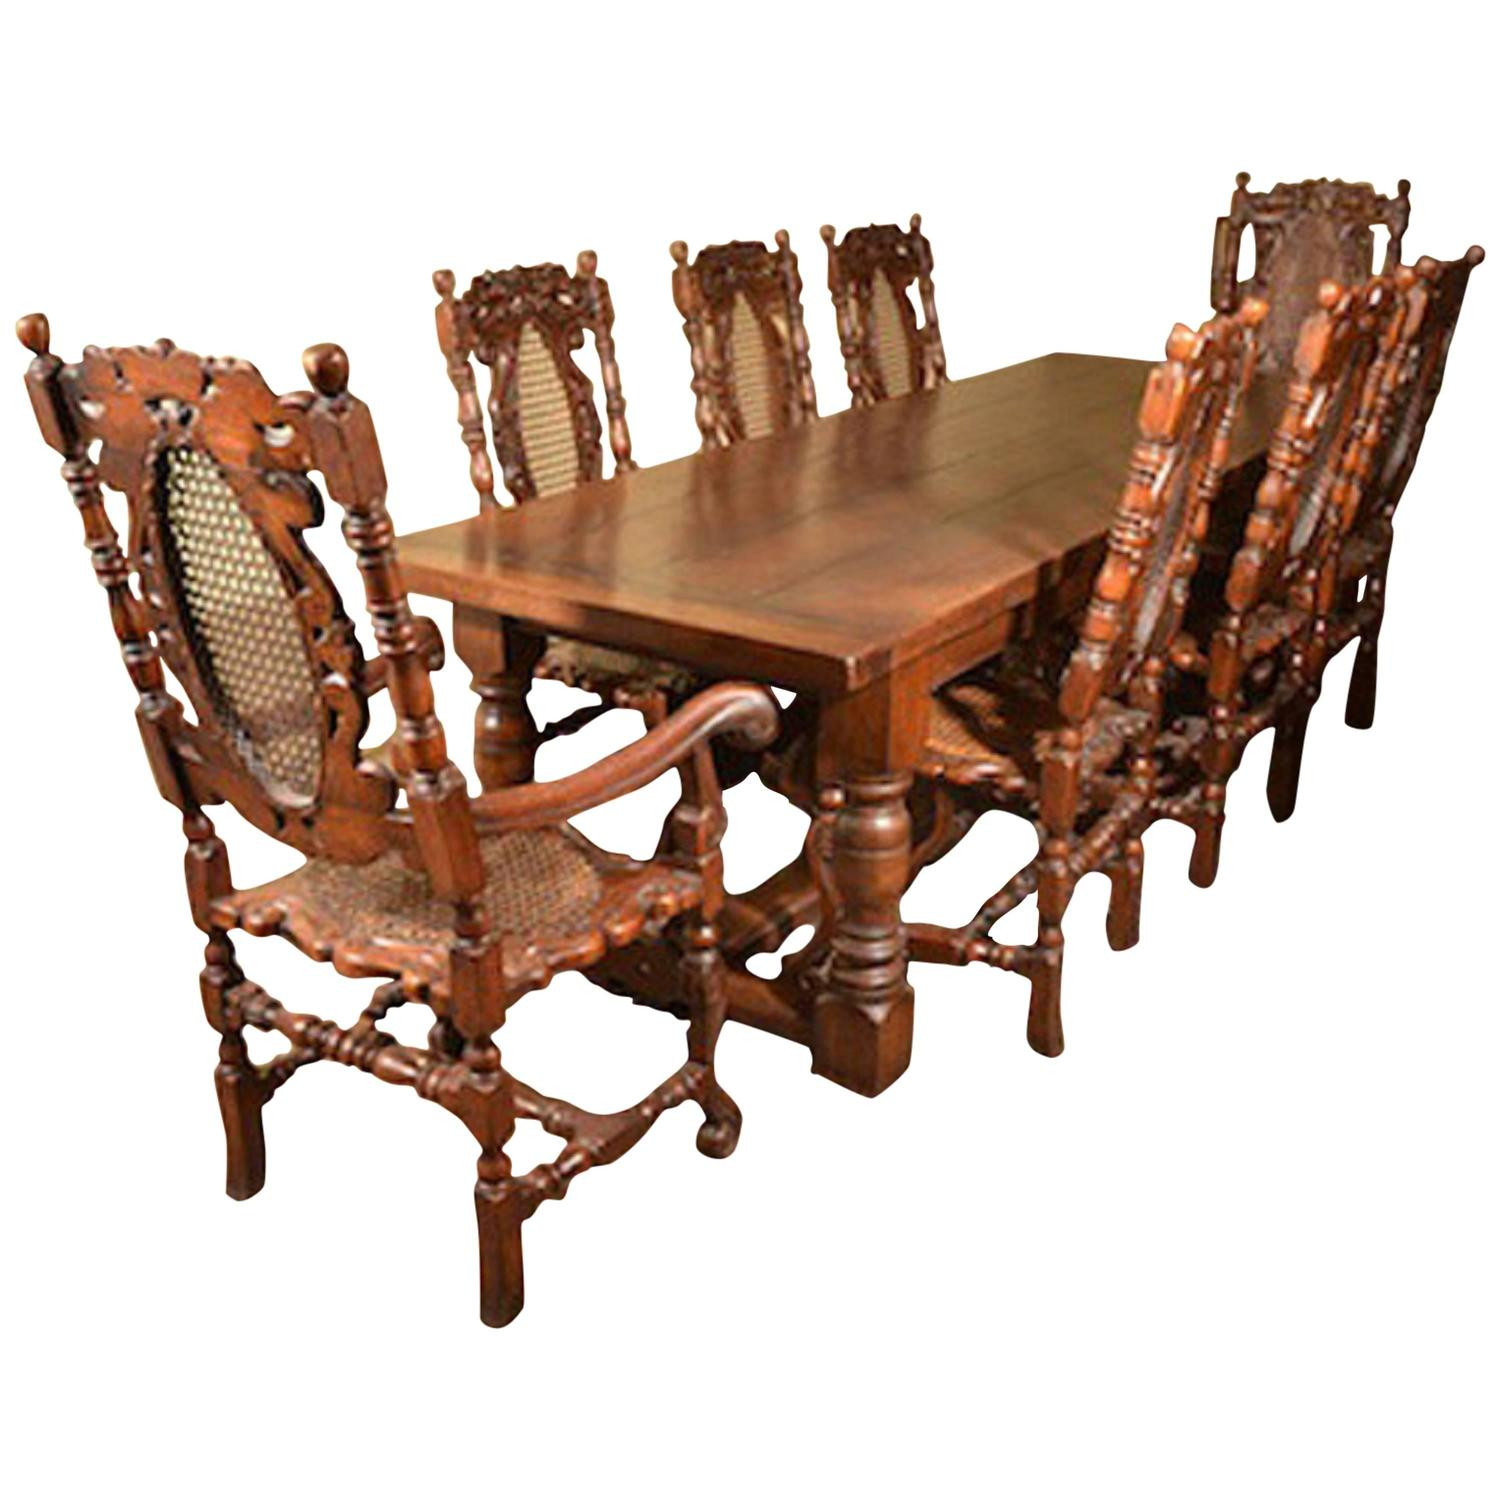 8 Chair Dinner Table
 Dining Table & Chairs Set